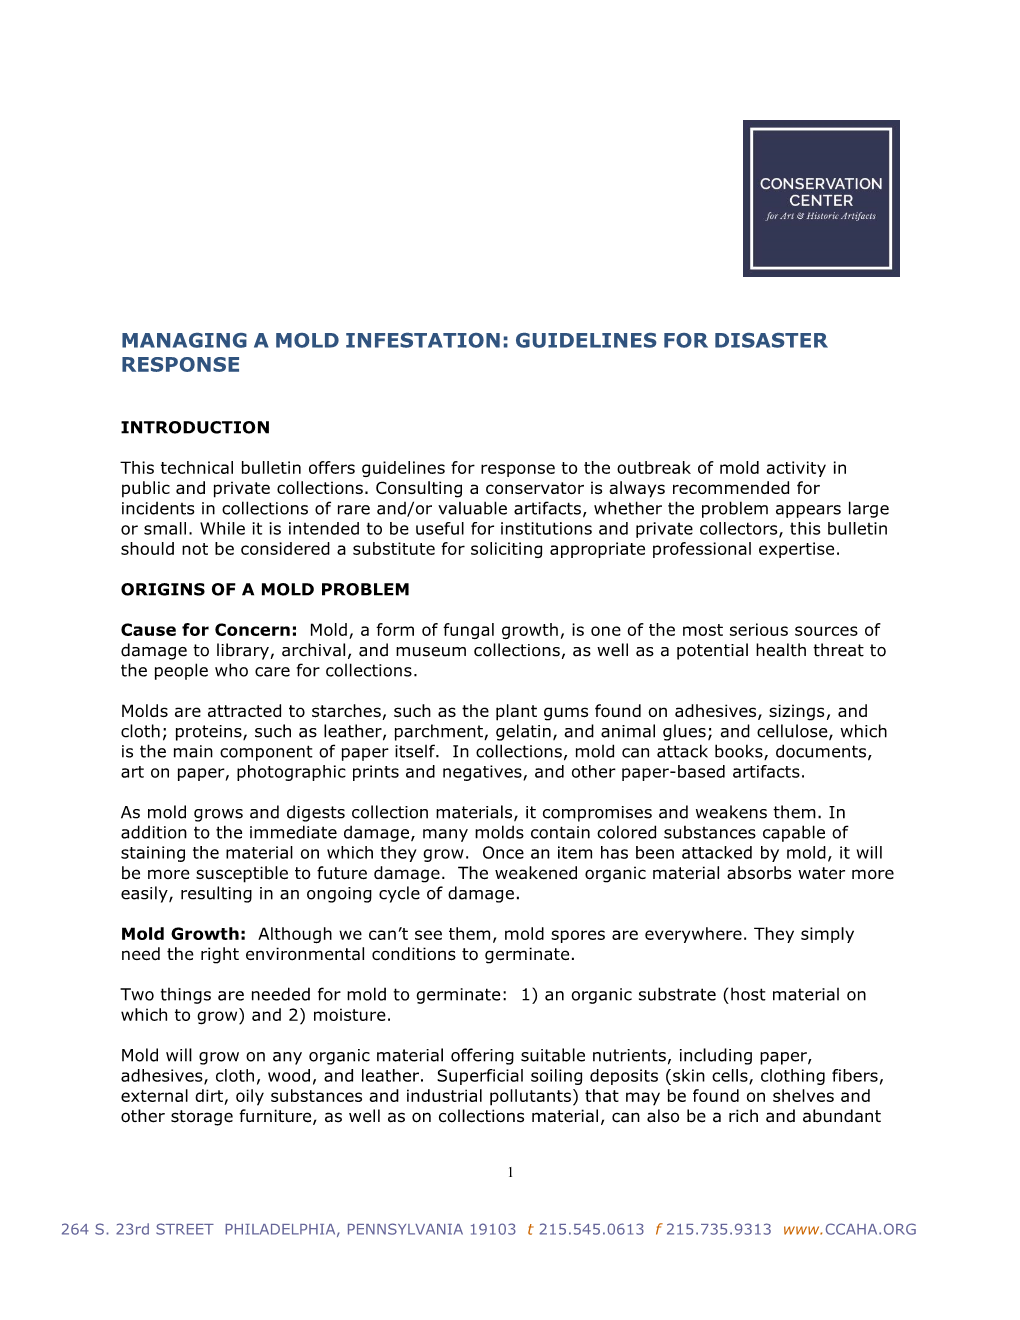 Managing a Mold Infestation: Guidelines for Disaster Response